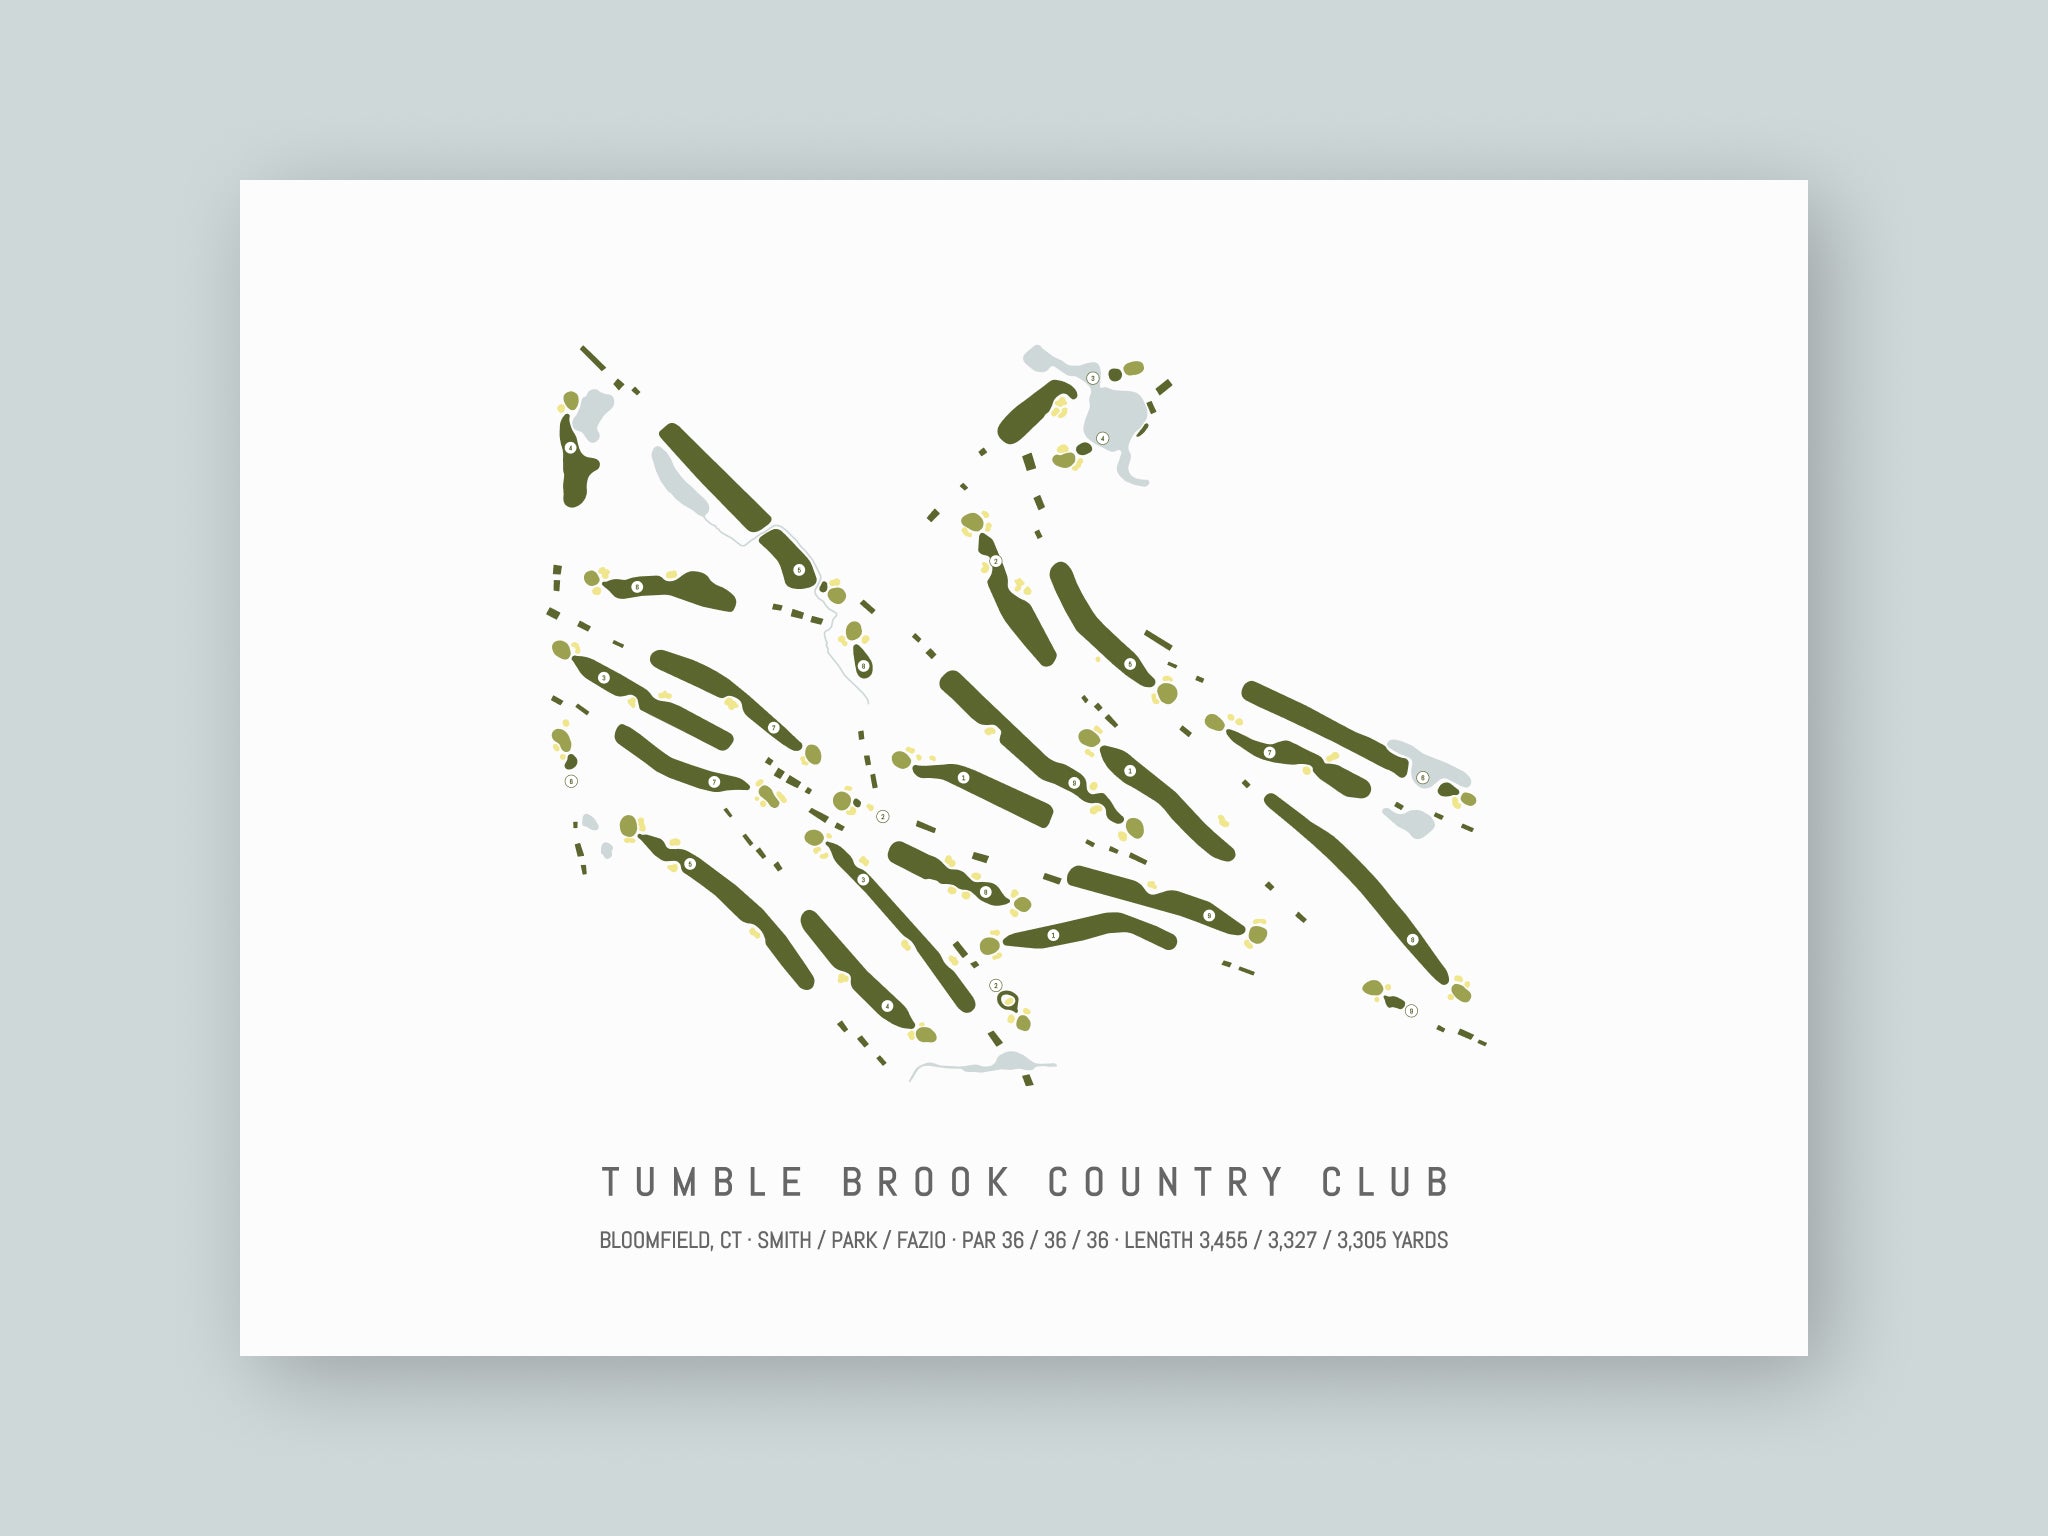 Tumble Brook Country Club